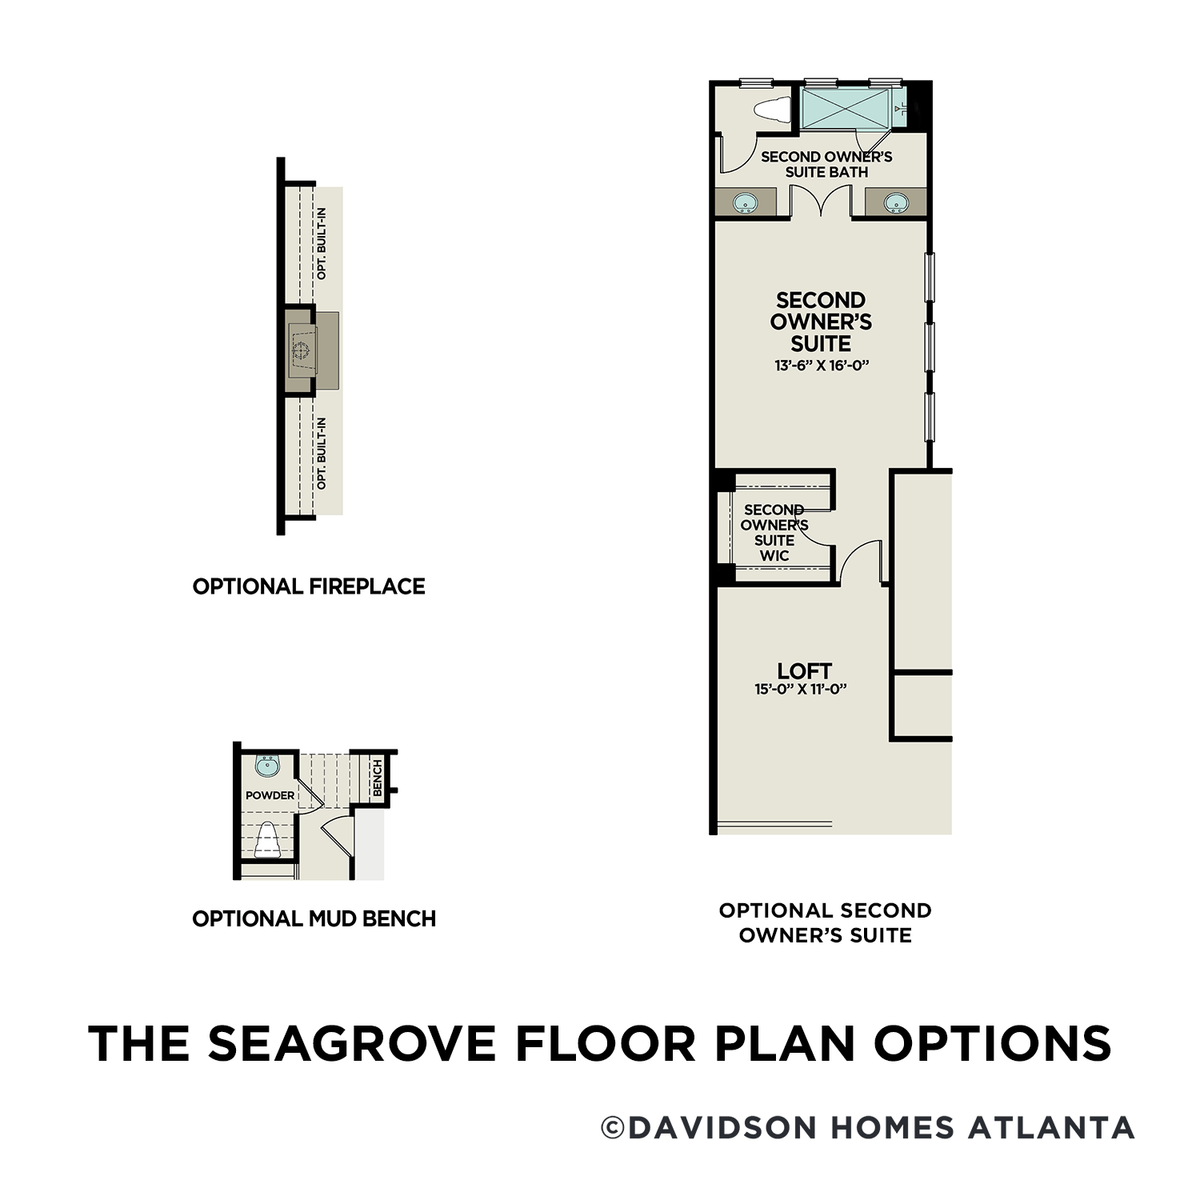 3 - The Seagrove A floor plan layout for 646 Stickley Oak Way in Davidson Homes' The Village at Towne Lake community.